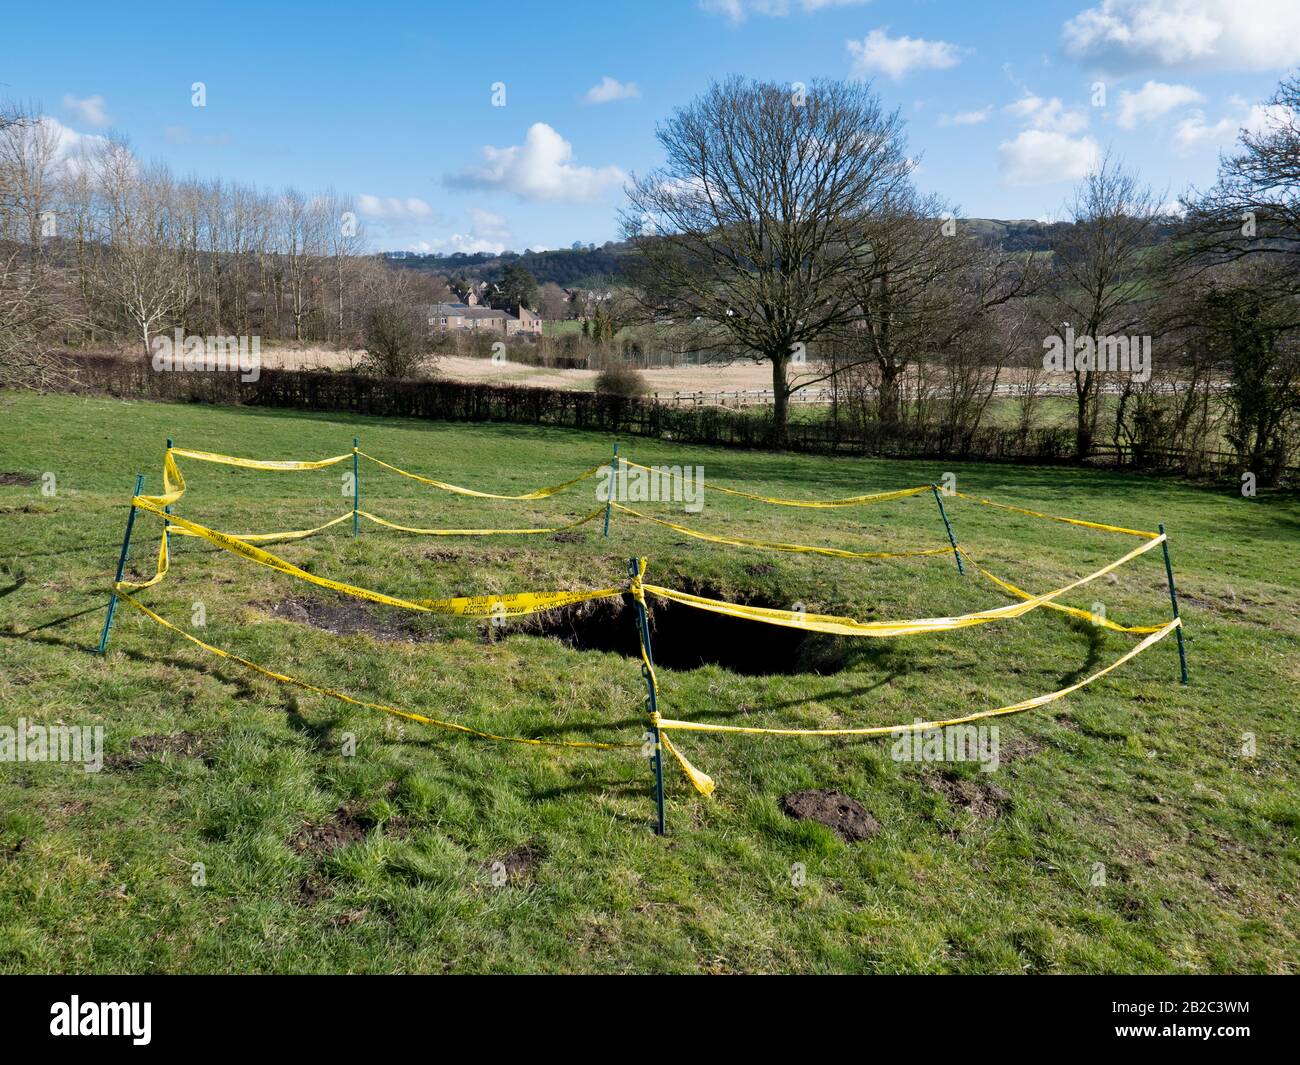 3M Sinkhole opens near Wirksworth, Derbyshire after heavy rain from Storm Jorge The sinkhole is around 3 meters wide & 6 meters deep, with water in the bottom appeared in Saturday 29th February 2020 in a field off Summer Lane on the outskirts of the Gem of the Peak, Wirksworth, Derbyshire. The sinkhole is thought to be part of old lead mining works which litter this Derbyshire countryside. It's believed that it opened up due to the heavy rain from the storms we have been having which in turn is washing the underground debris from old min workings making the areas above unstable & potentially Stock Photo